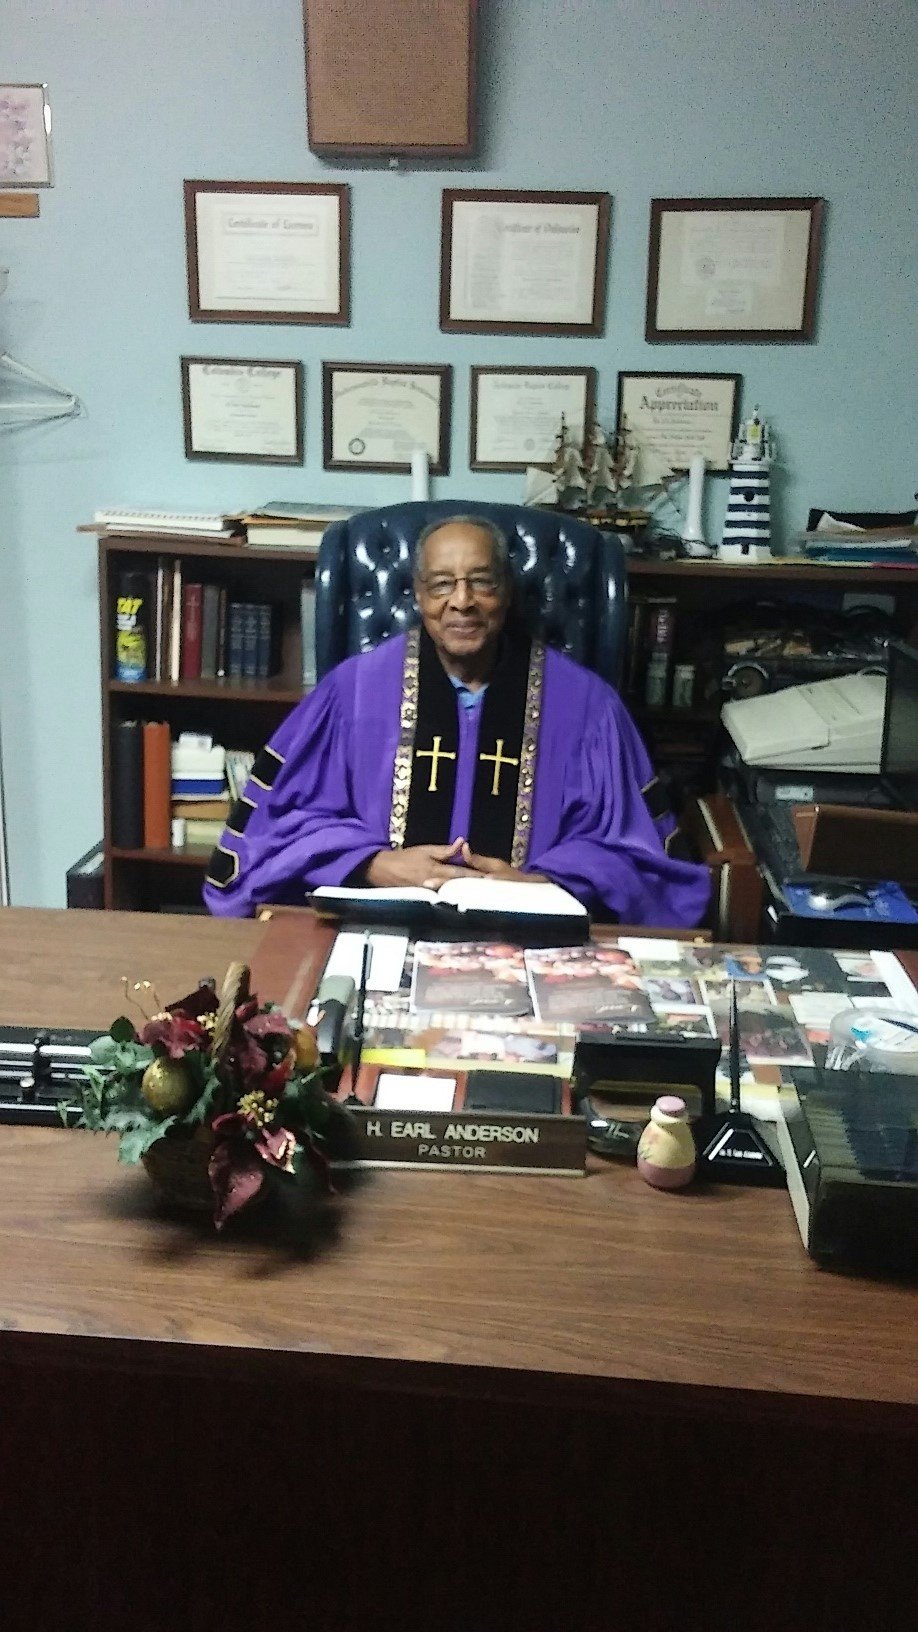 Pastor Dr. H. Earl Anderson